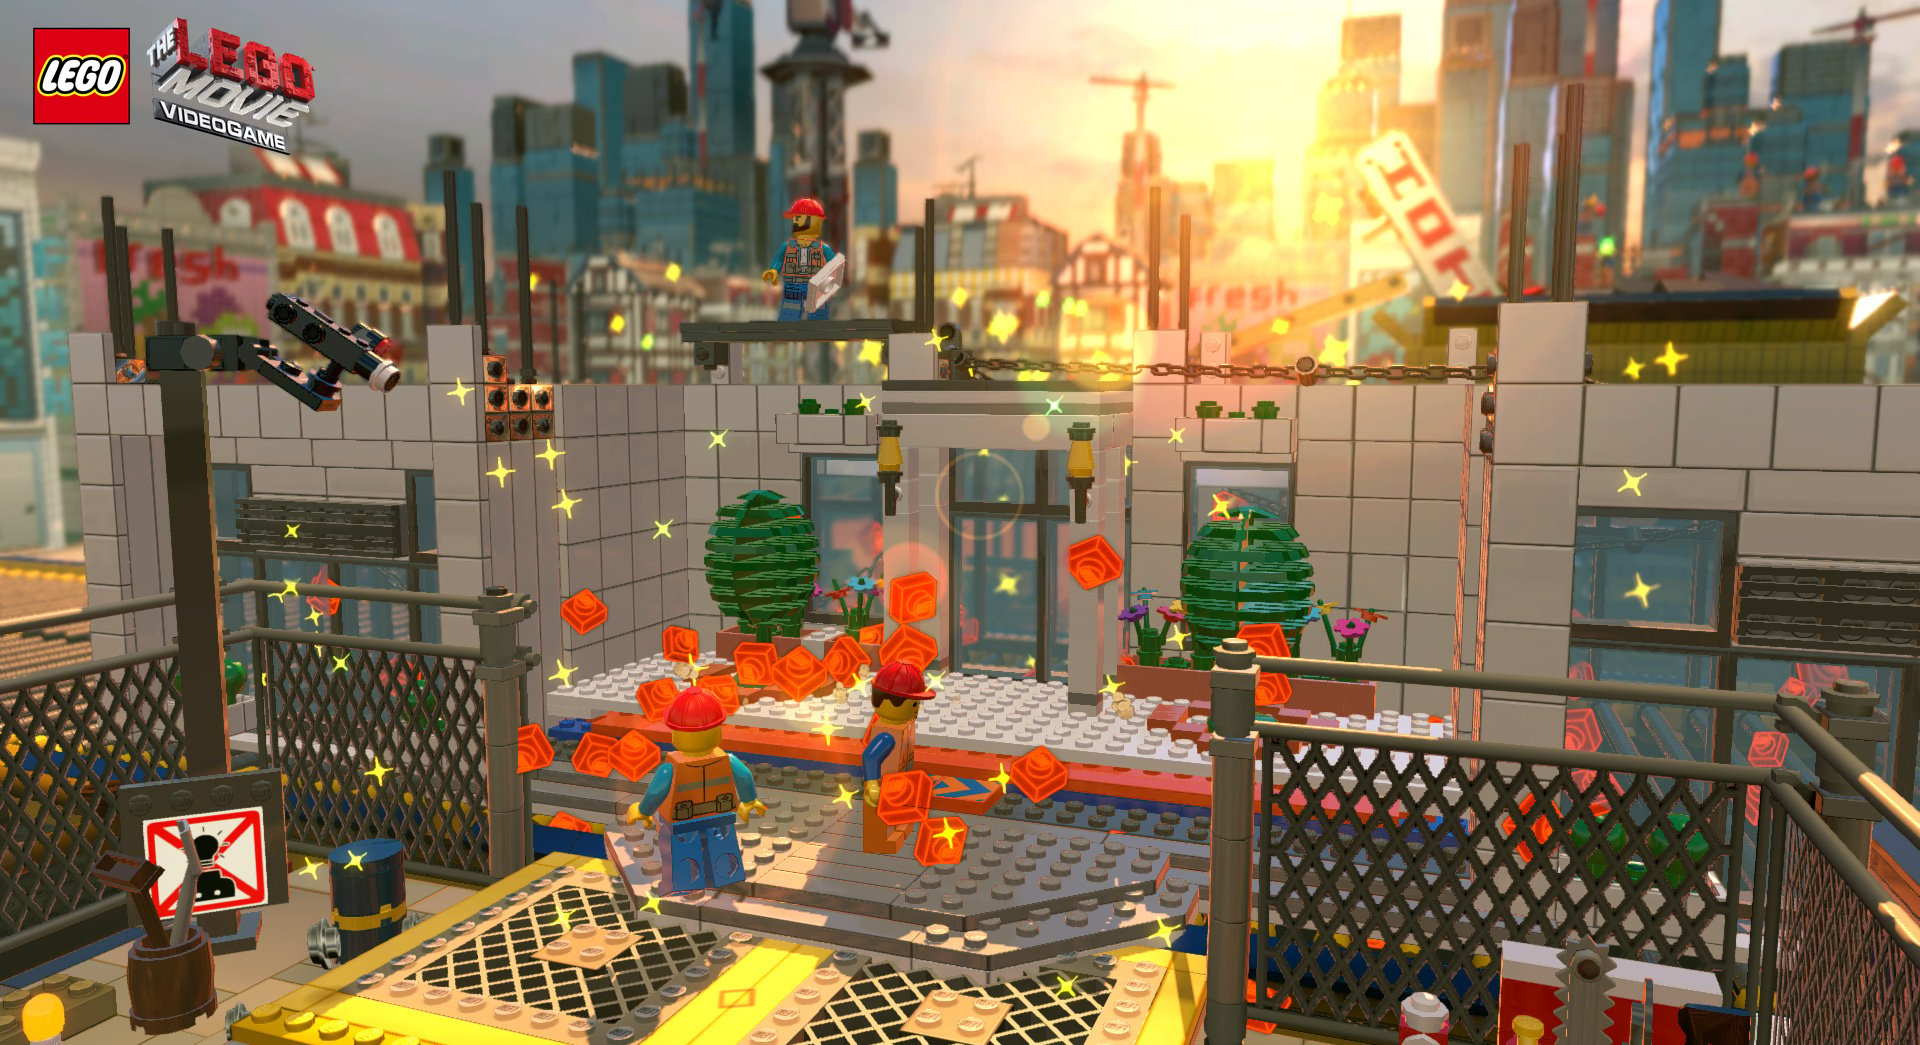 The LEGO Movie Videogame (PS3 / PlayStation 3) Game Profile | News